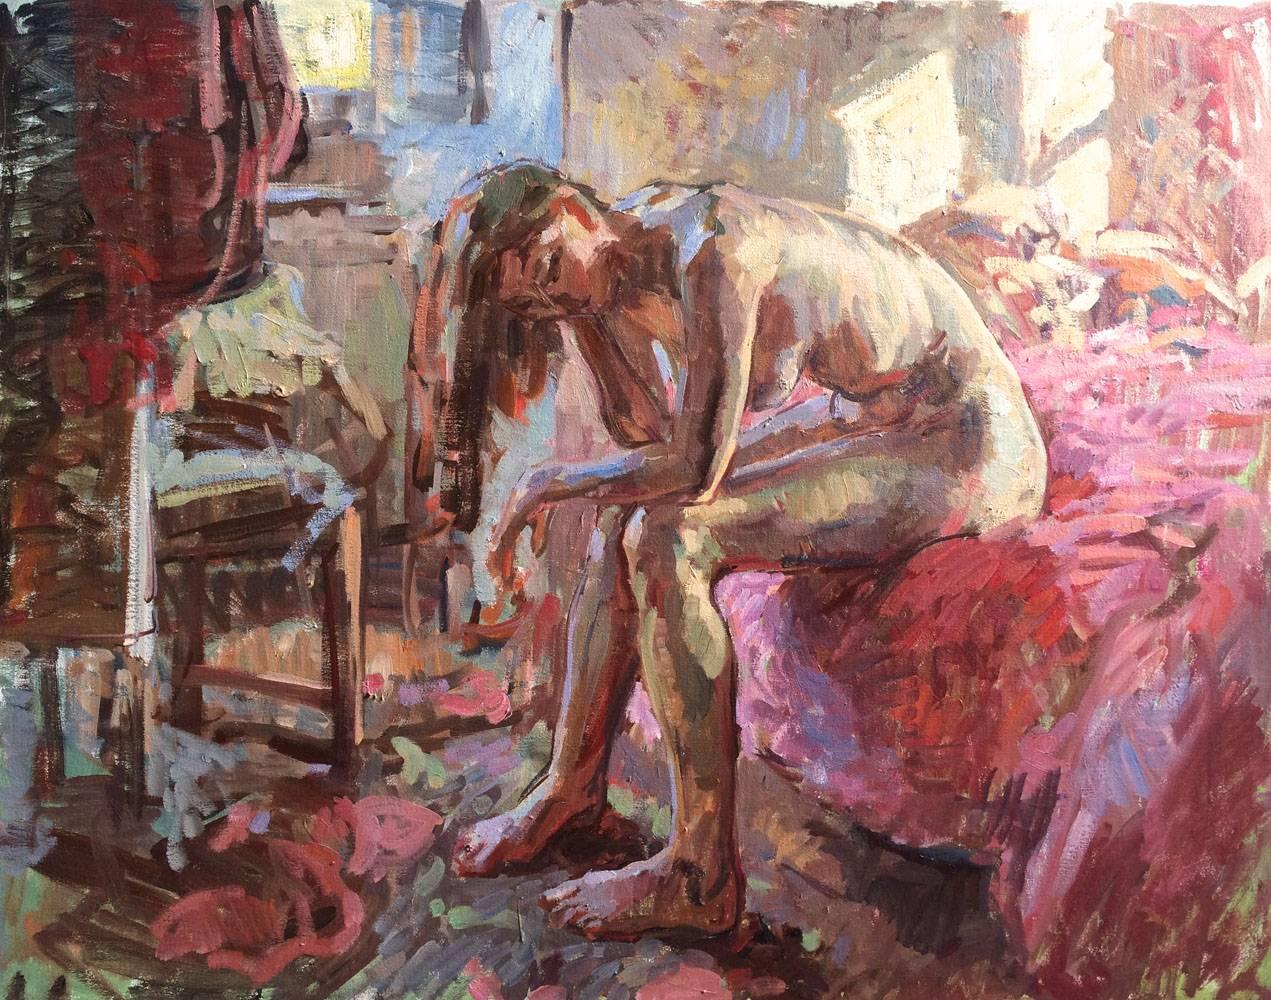 "Sitting Nude, Bea" 2016 oil painting of nude woman seated in thought, pink hues - Art by Ben Fenske